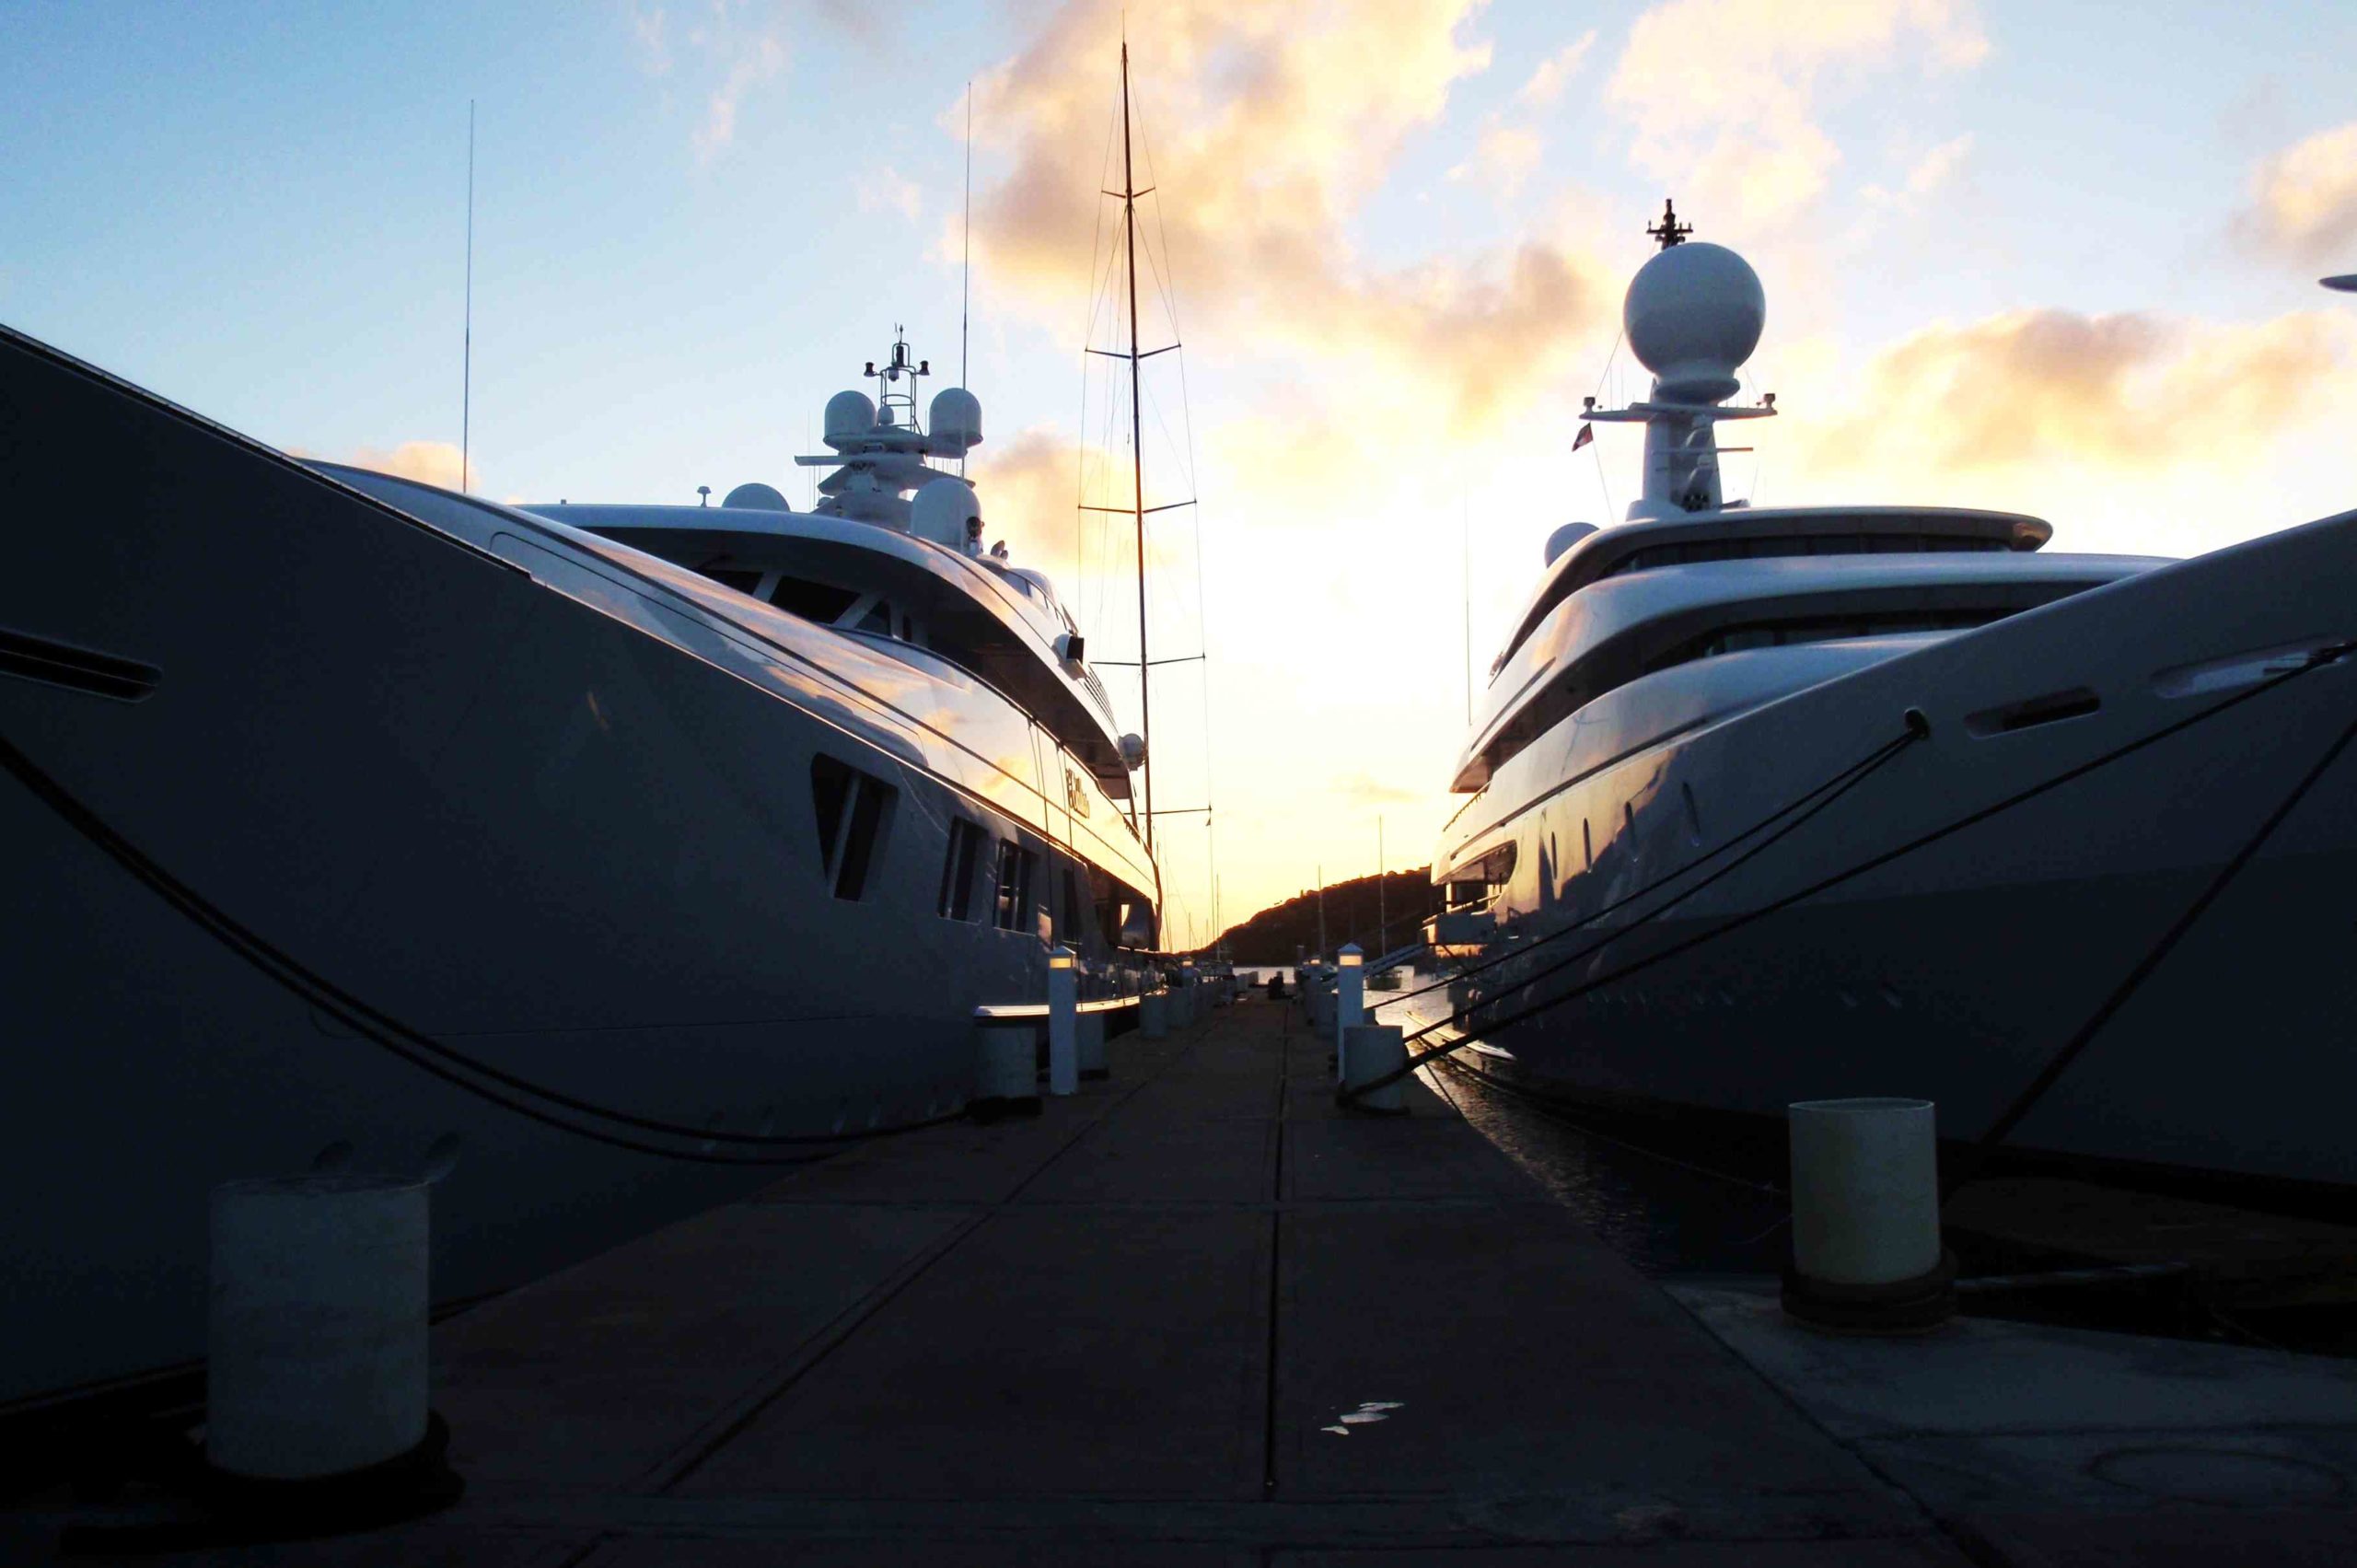 Two superyachts with the sun setting behind